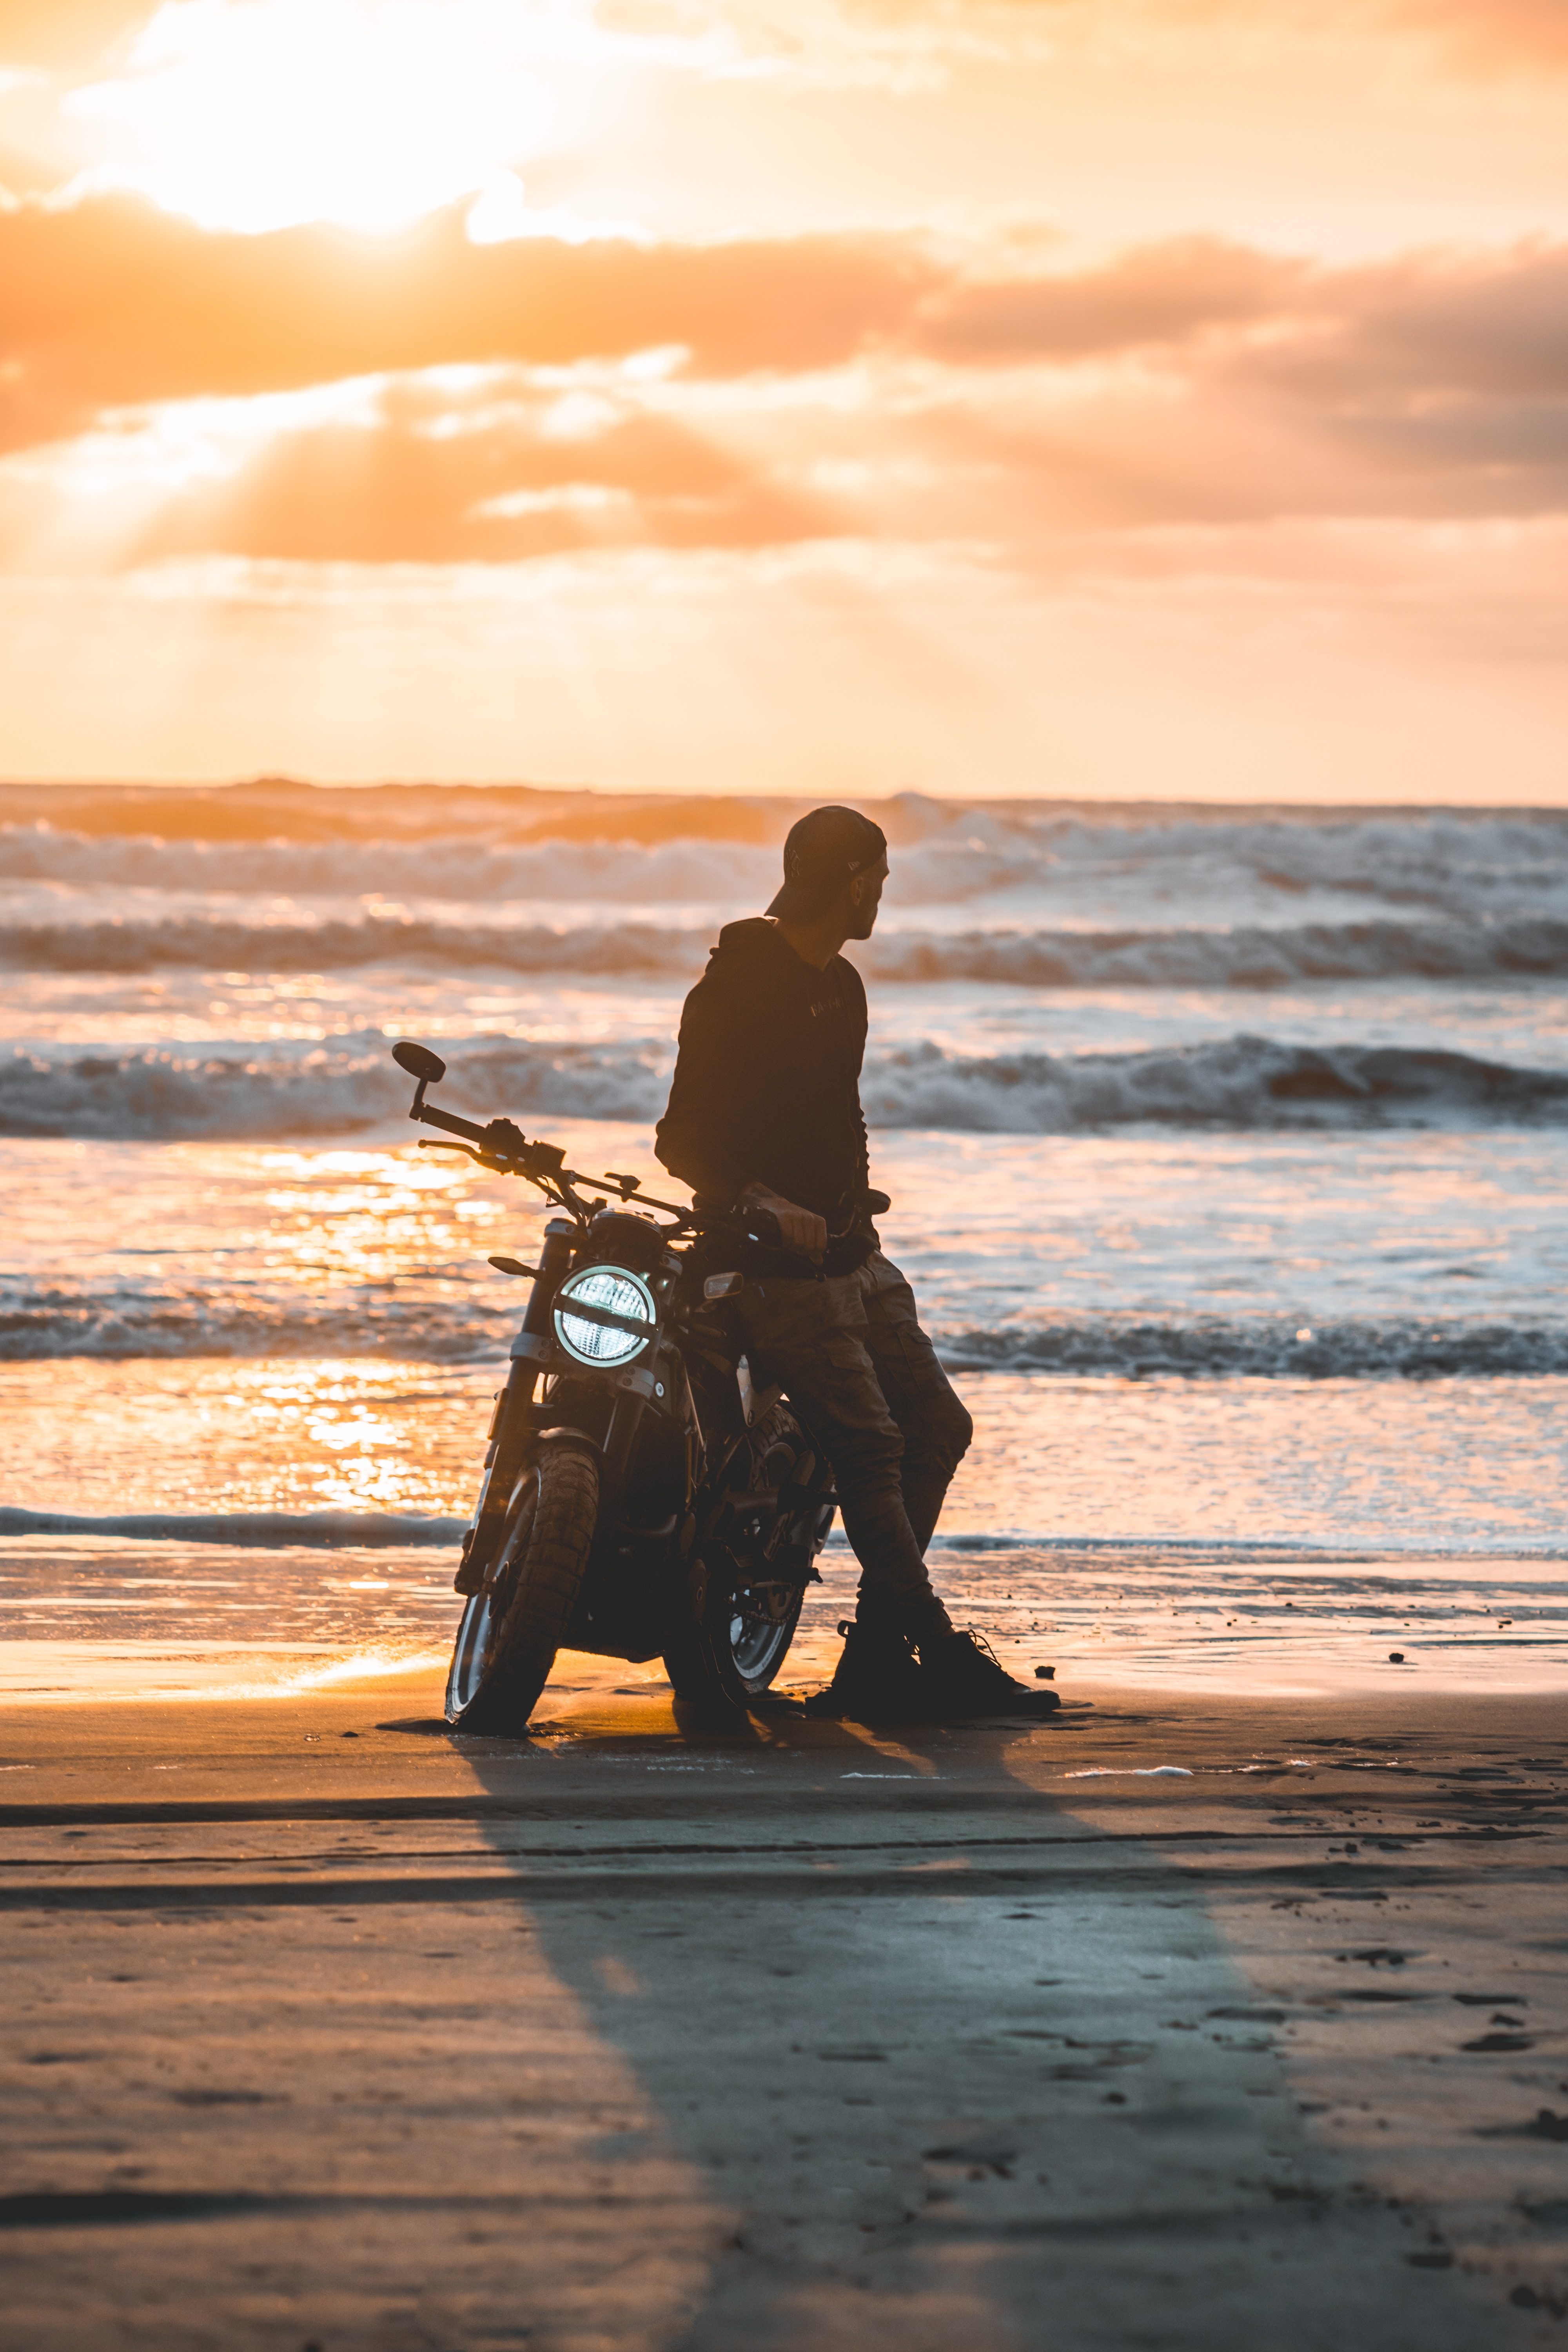 Free HD motorcycle, motorcycles, motorcyclist, sunset, silhouette, loneliness